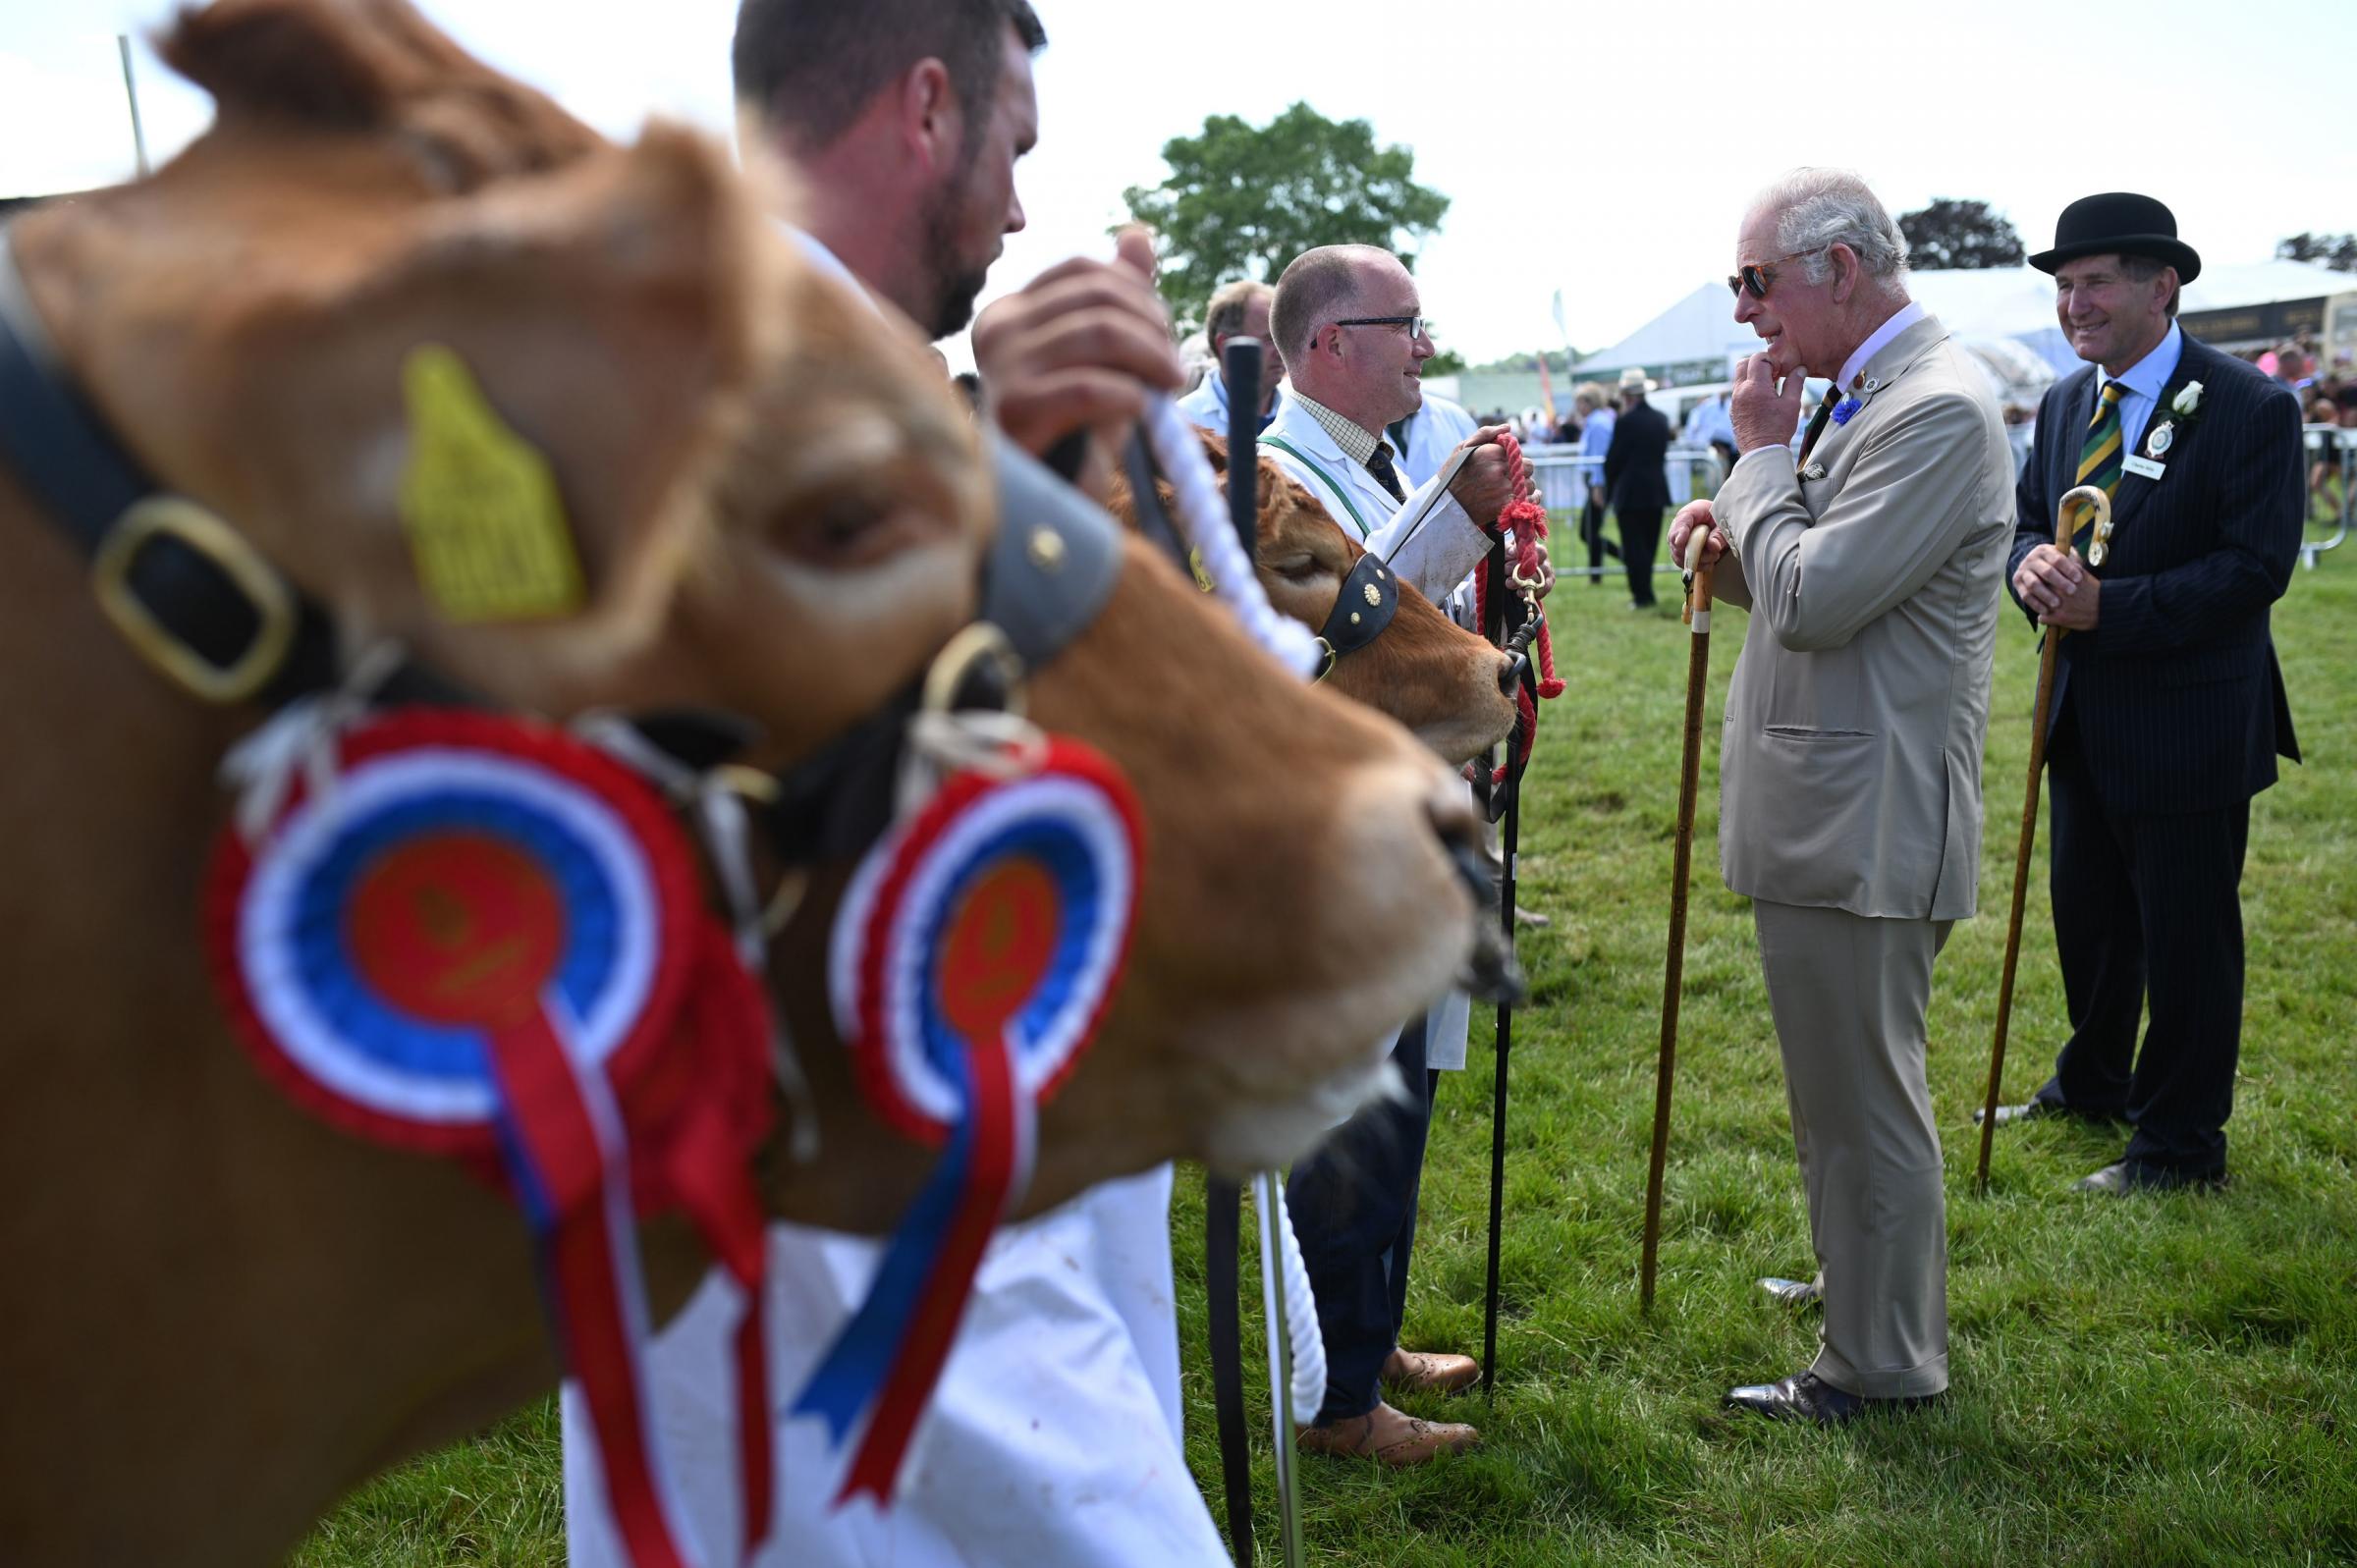 King Charles, then Prince of Wales, views cattle being judged during a visit to the Great Yorkshire Show in 2021, with Charles Mills, right